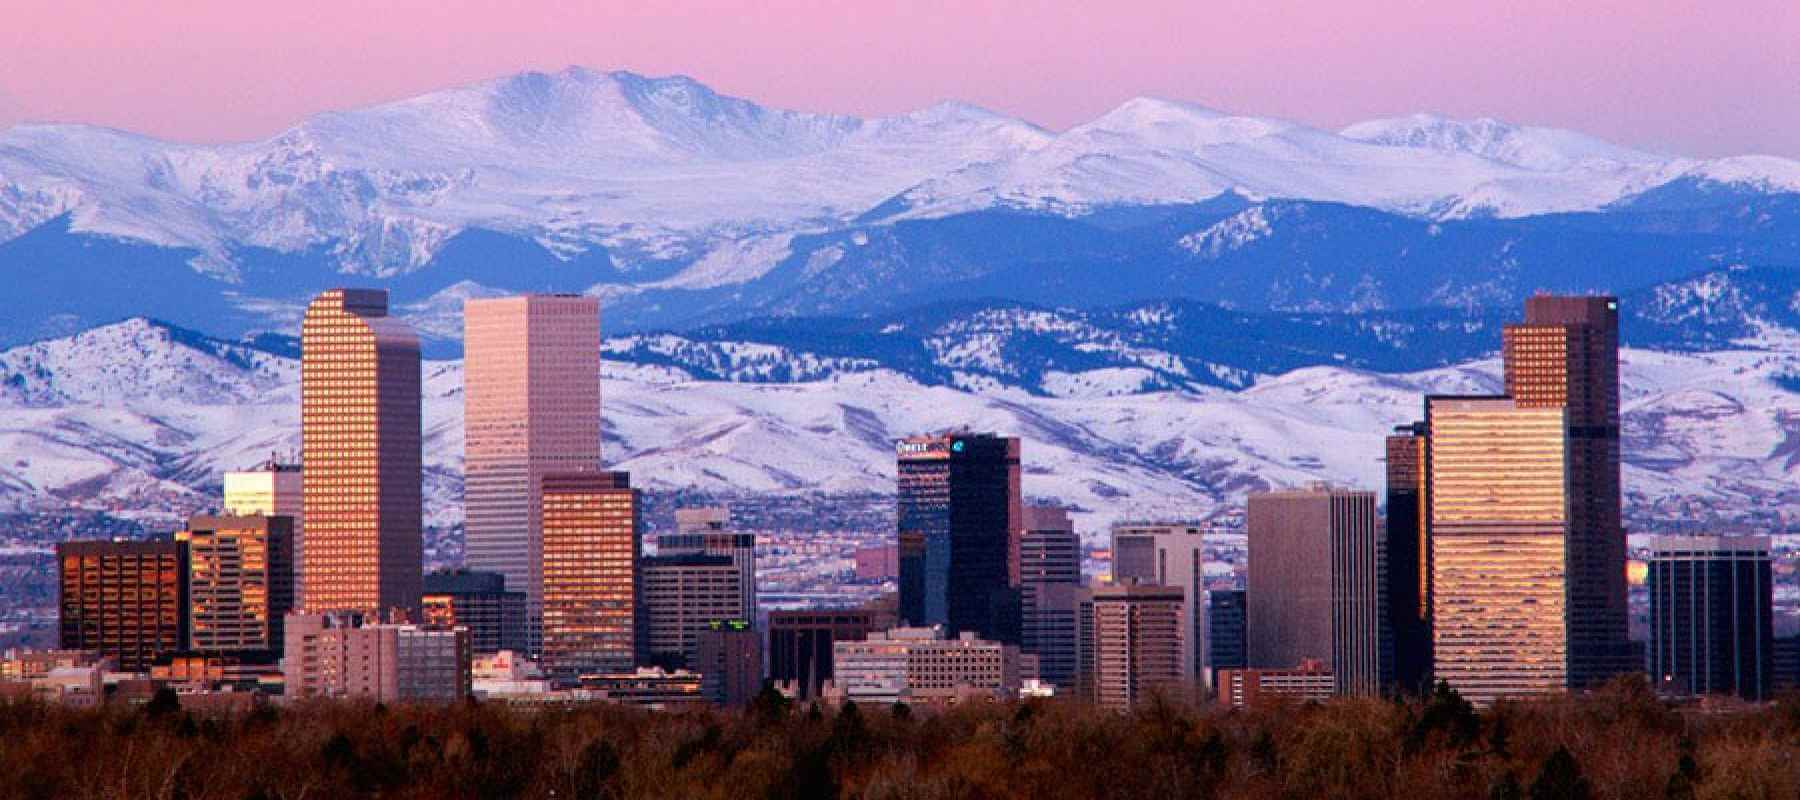 Denver: The second most Gentrified city in the U.S.